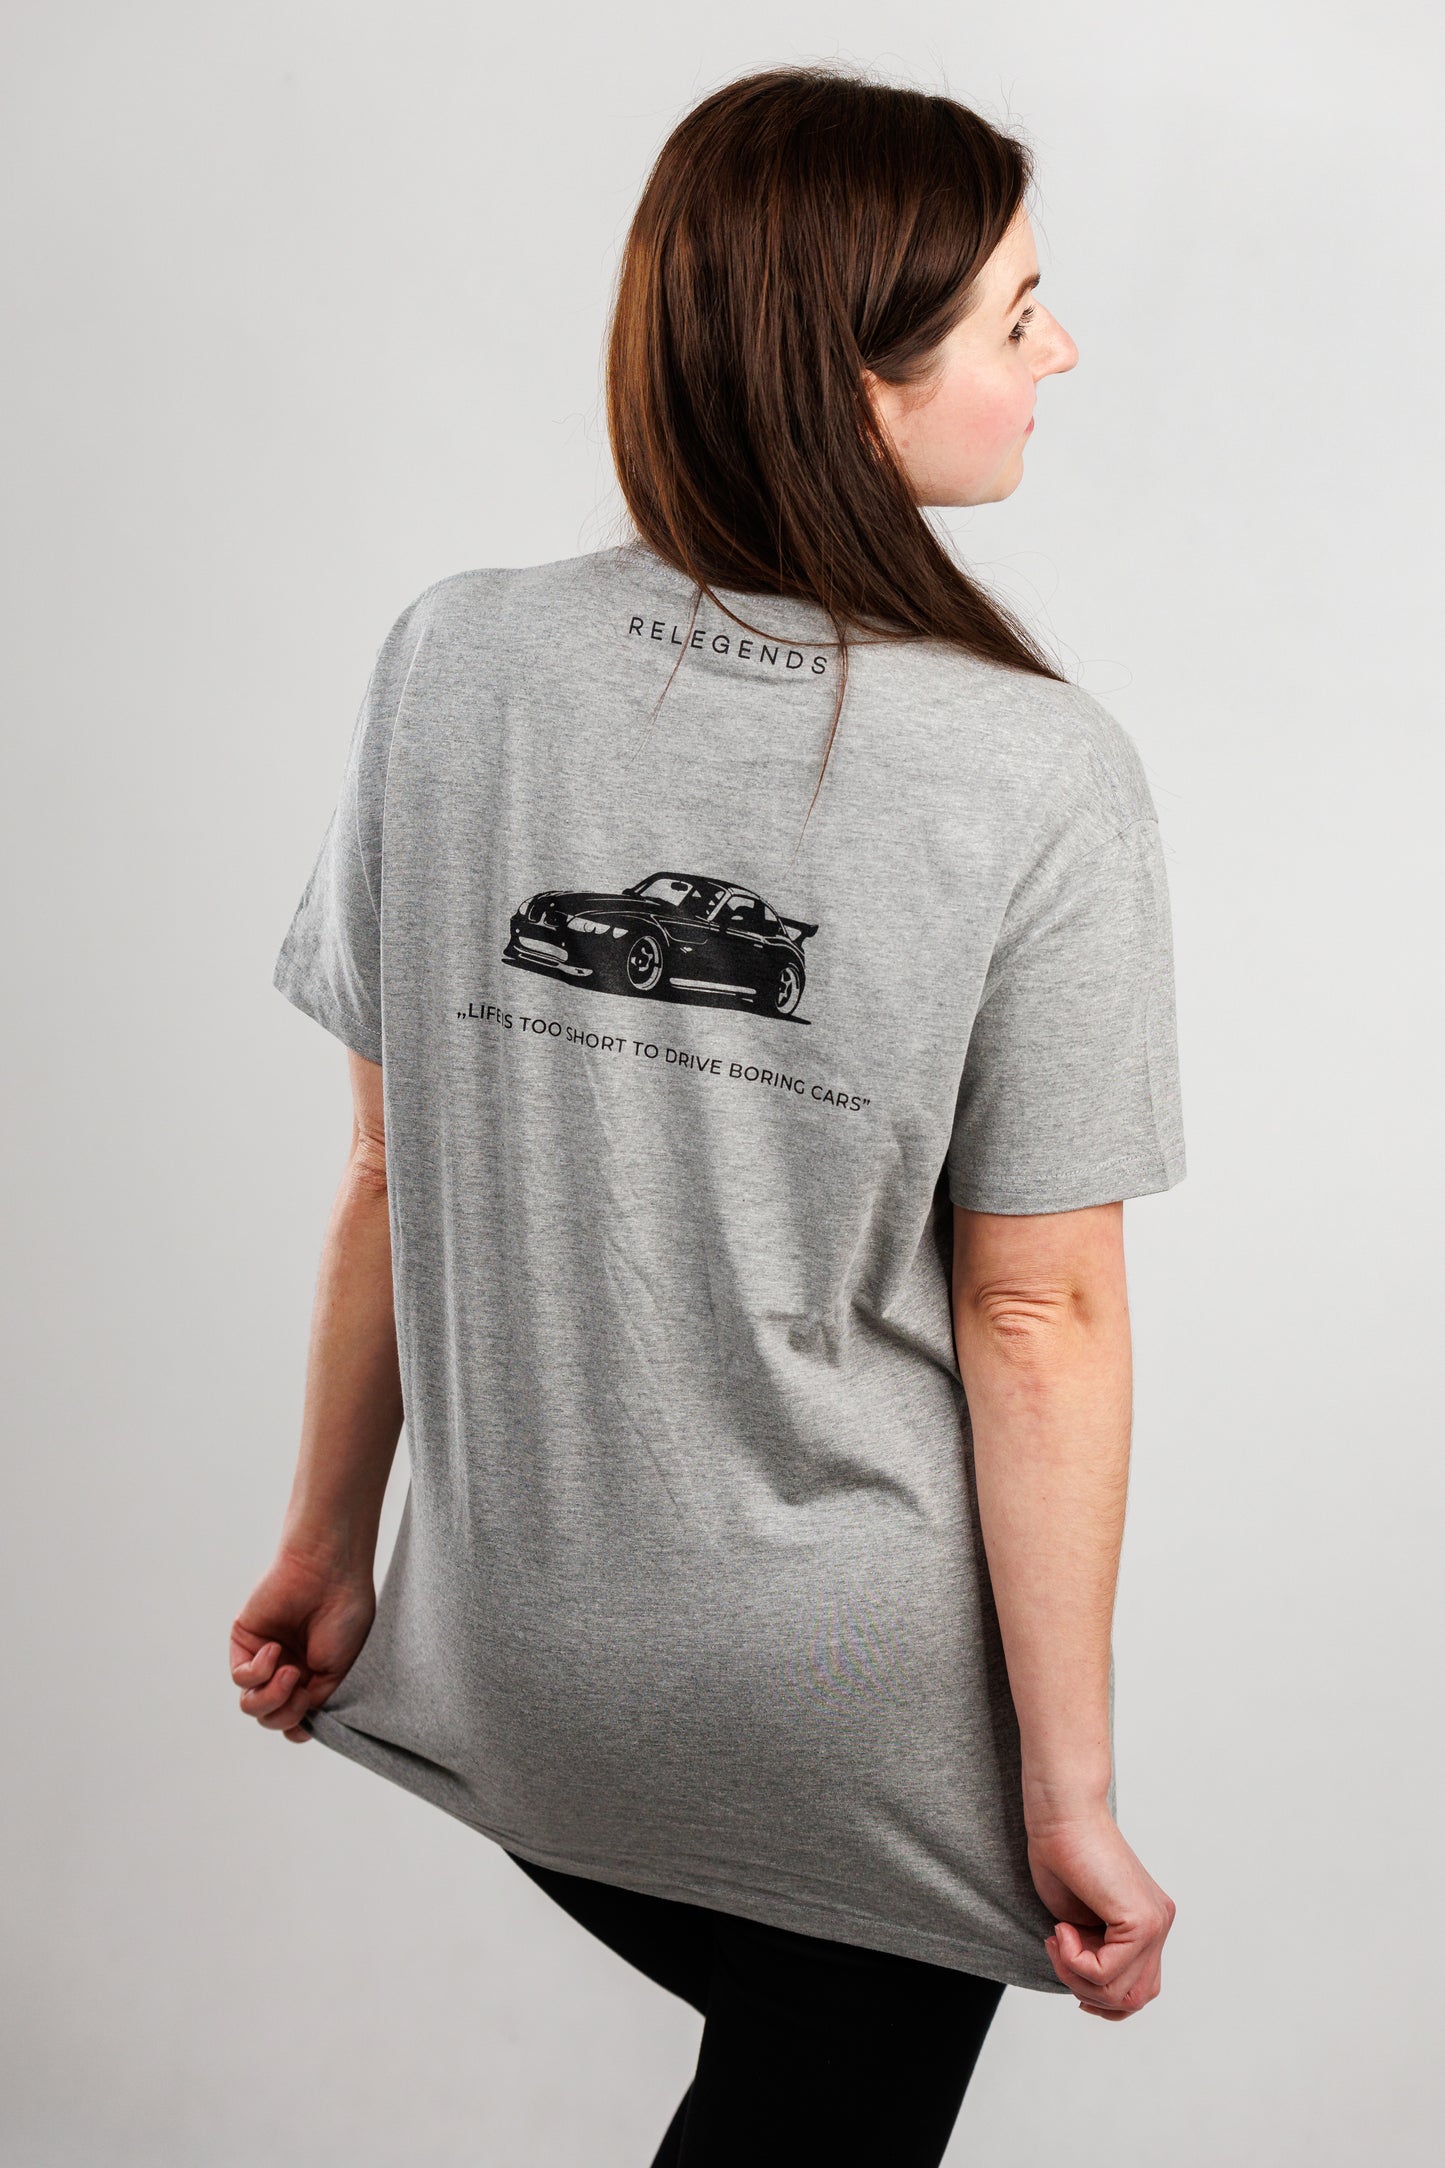 "Life is Too Short to Drive Boring Cars" T-shirt